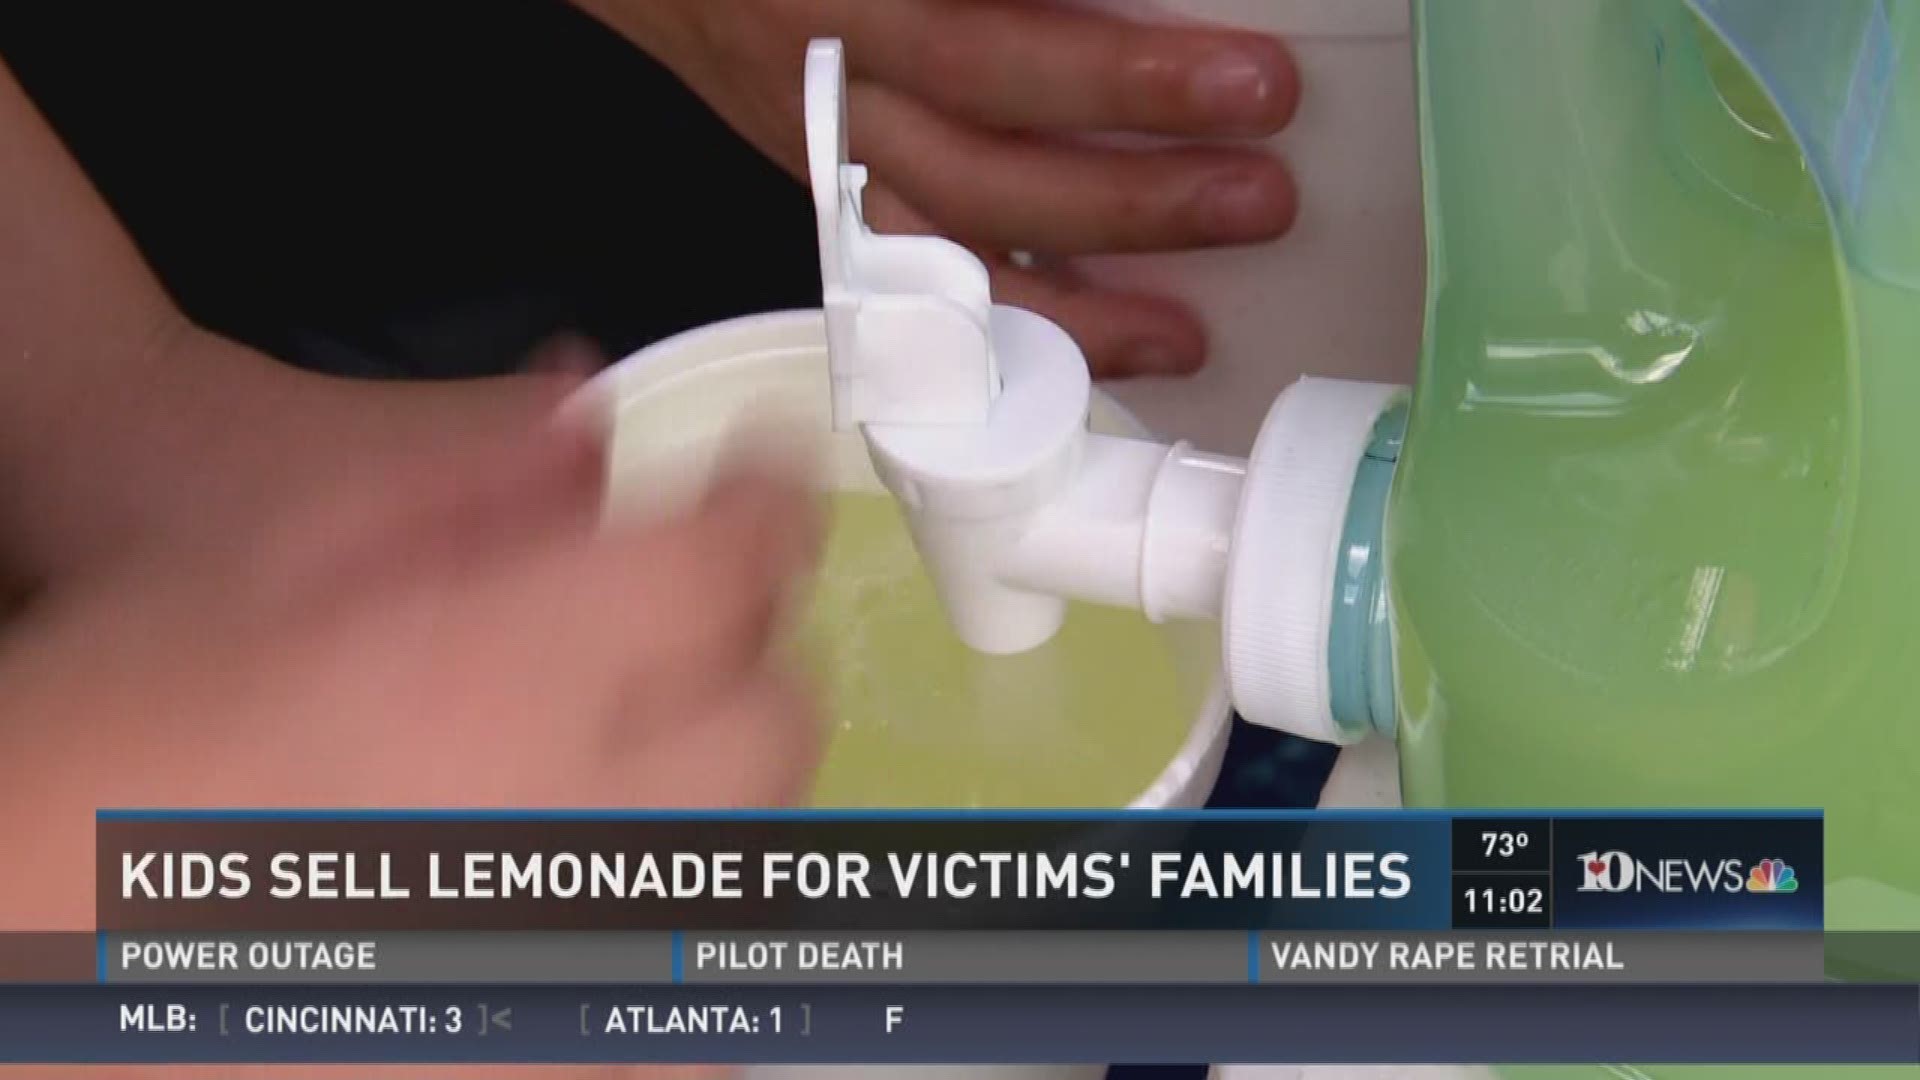 10News reporter Michael Crowe reports from Orlando, Fla. One family there is selling lemonade to help the families of the shooting victims, just down the road from Pulse nightclub. (6/14/16)